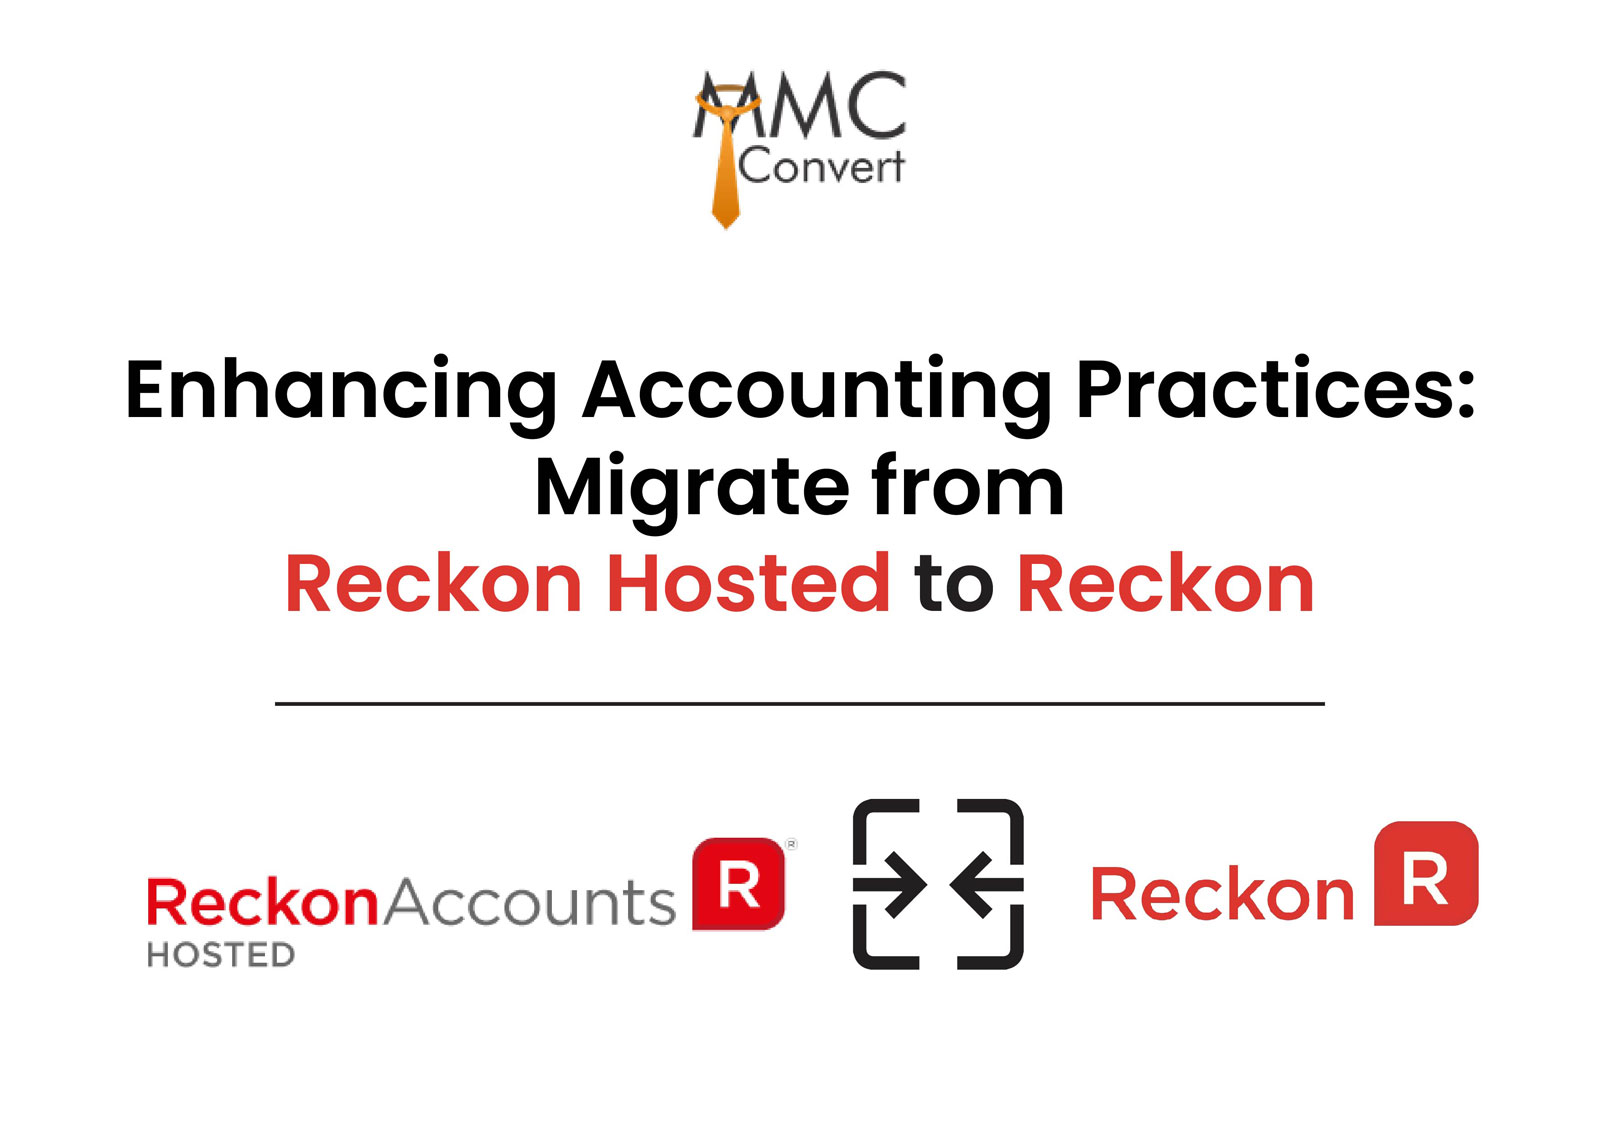 Enhancing Accounting Practices: Migrate from Reckon Hosted to Reckon